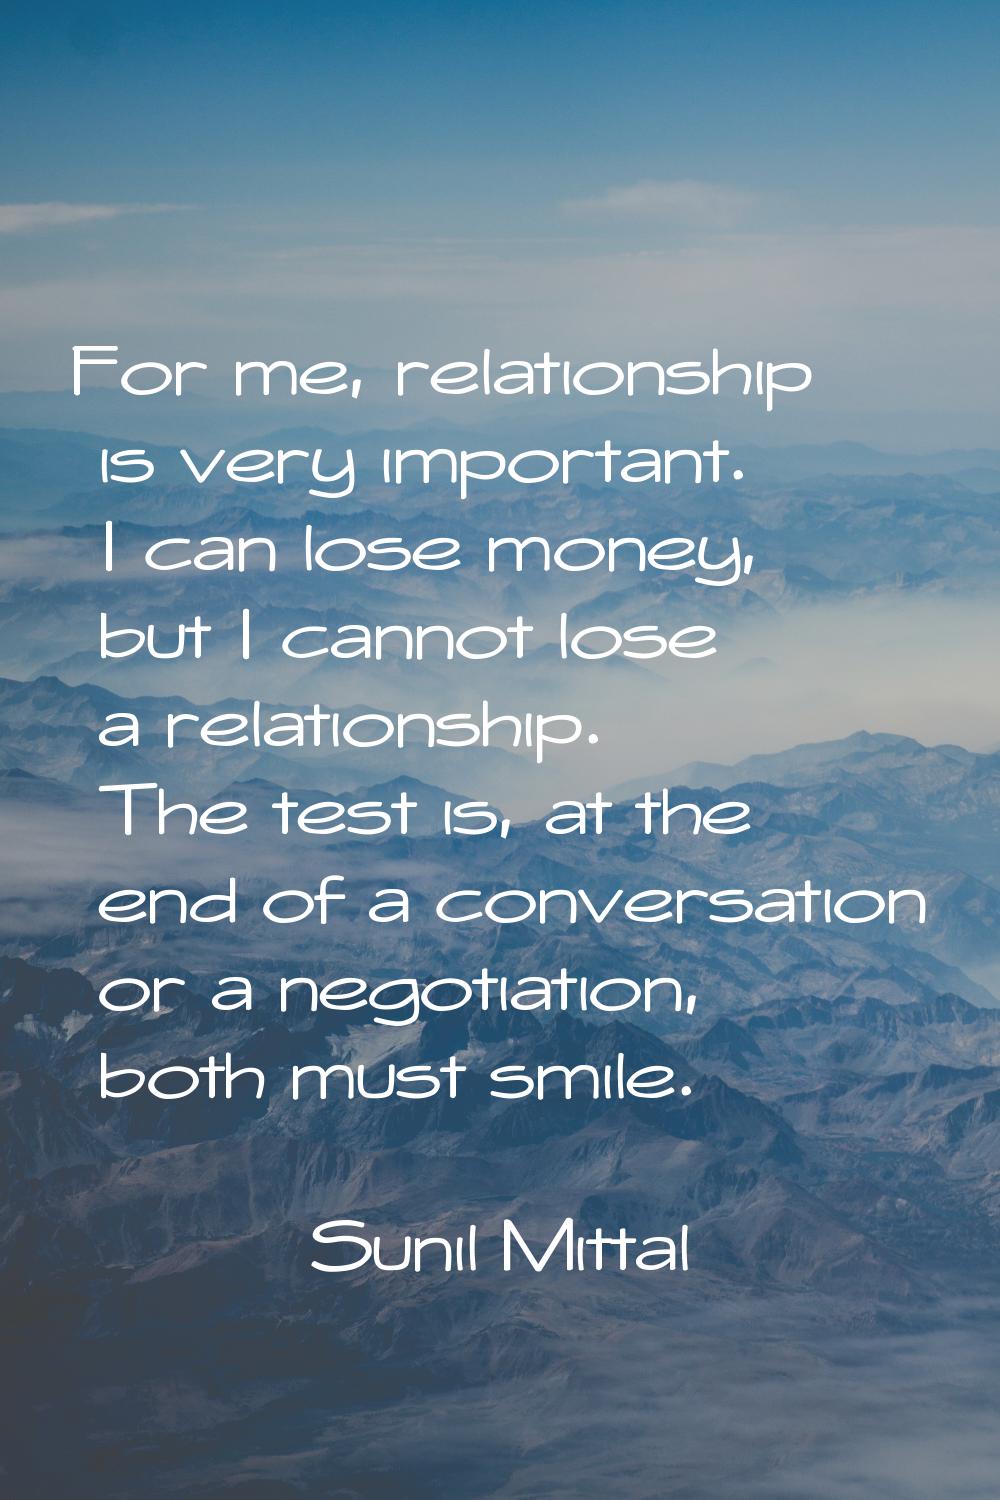 For me, relationship is very important. I can lose money, but I cannot lose a relationship. The tes